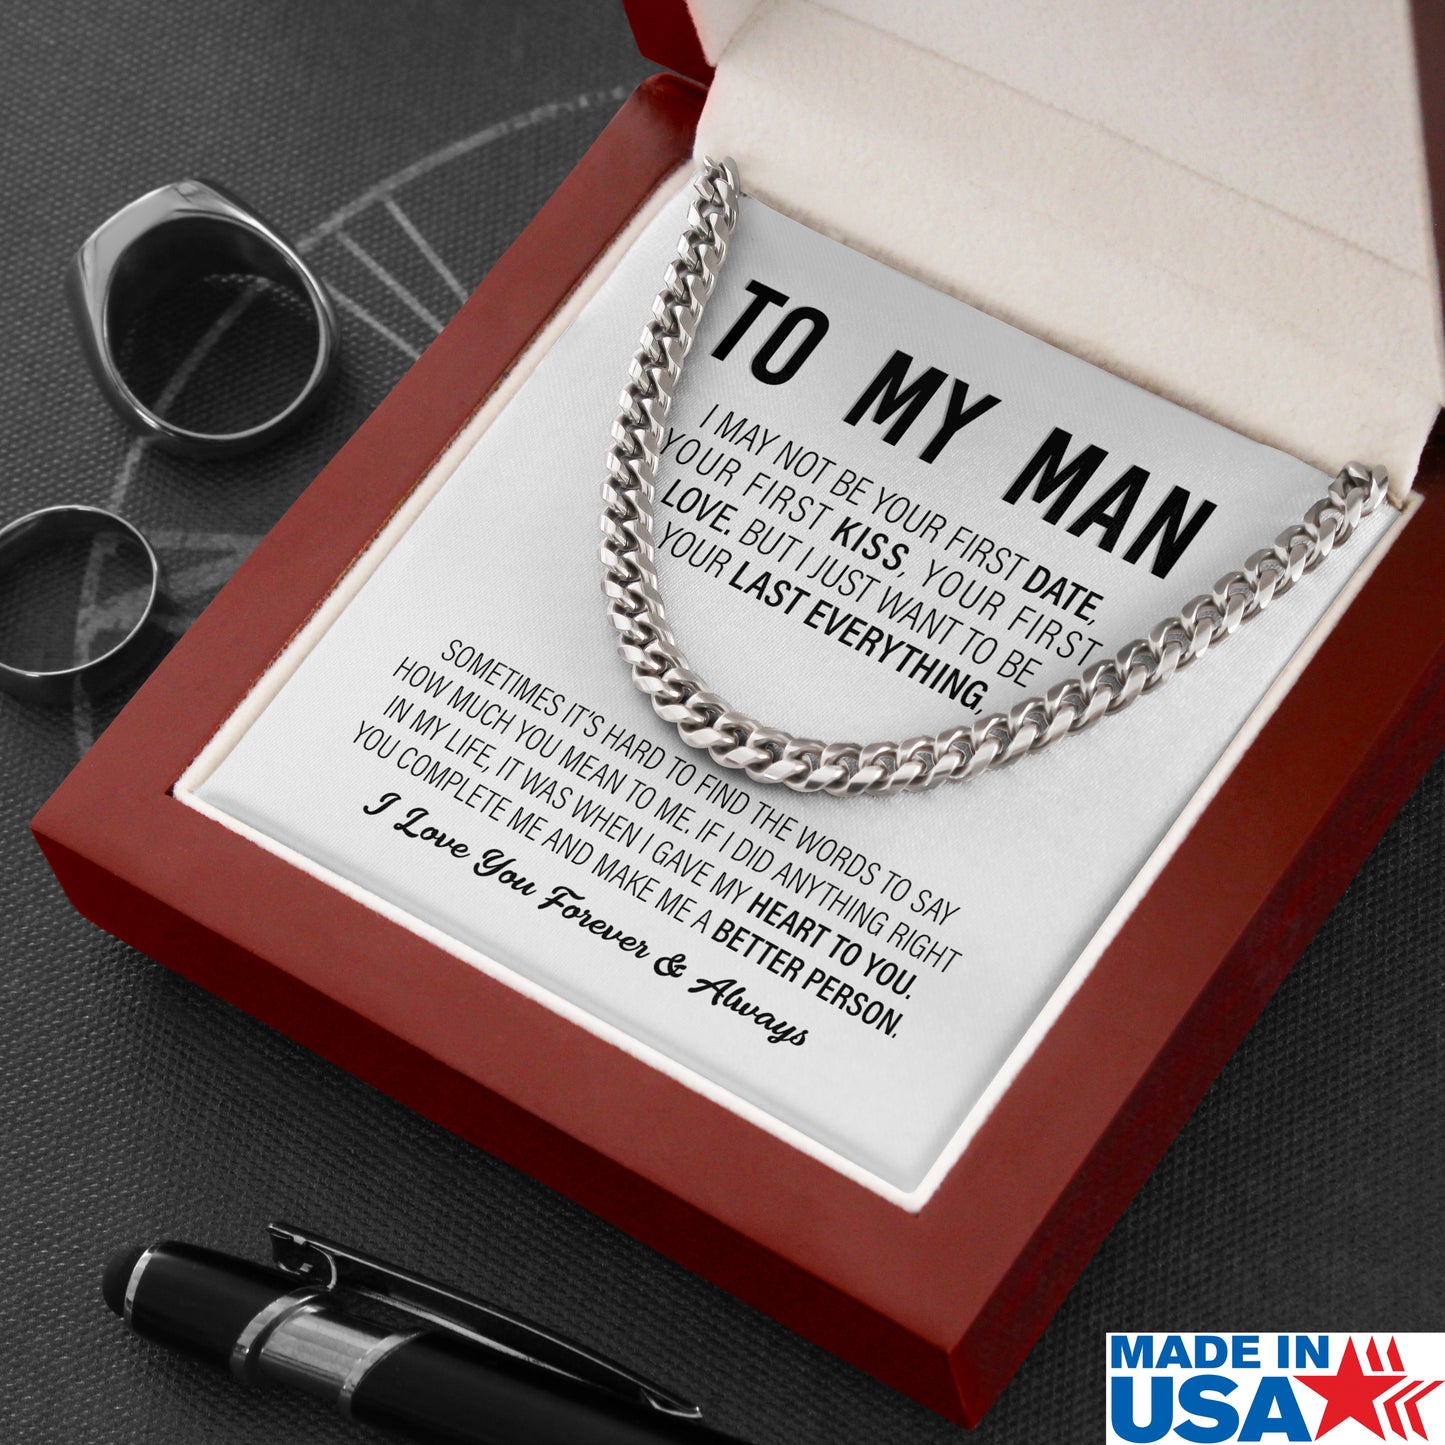 To My Man - Your Last Everything - Cuban Link Chain